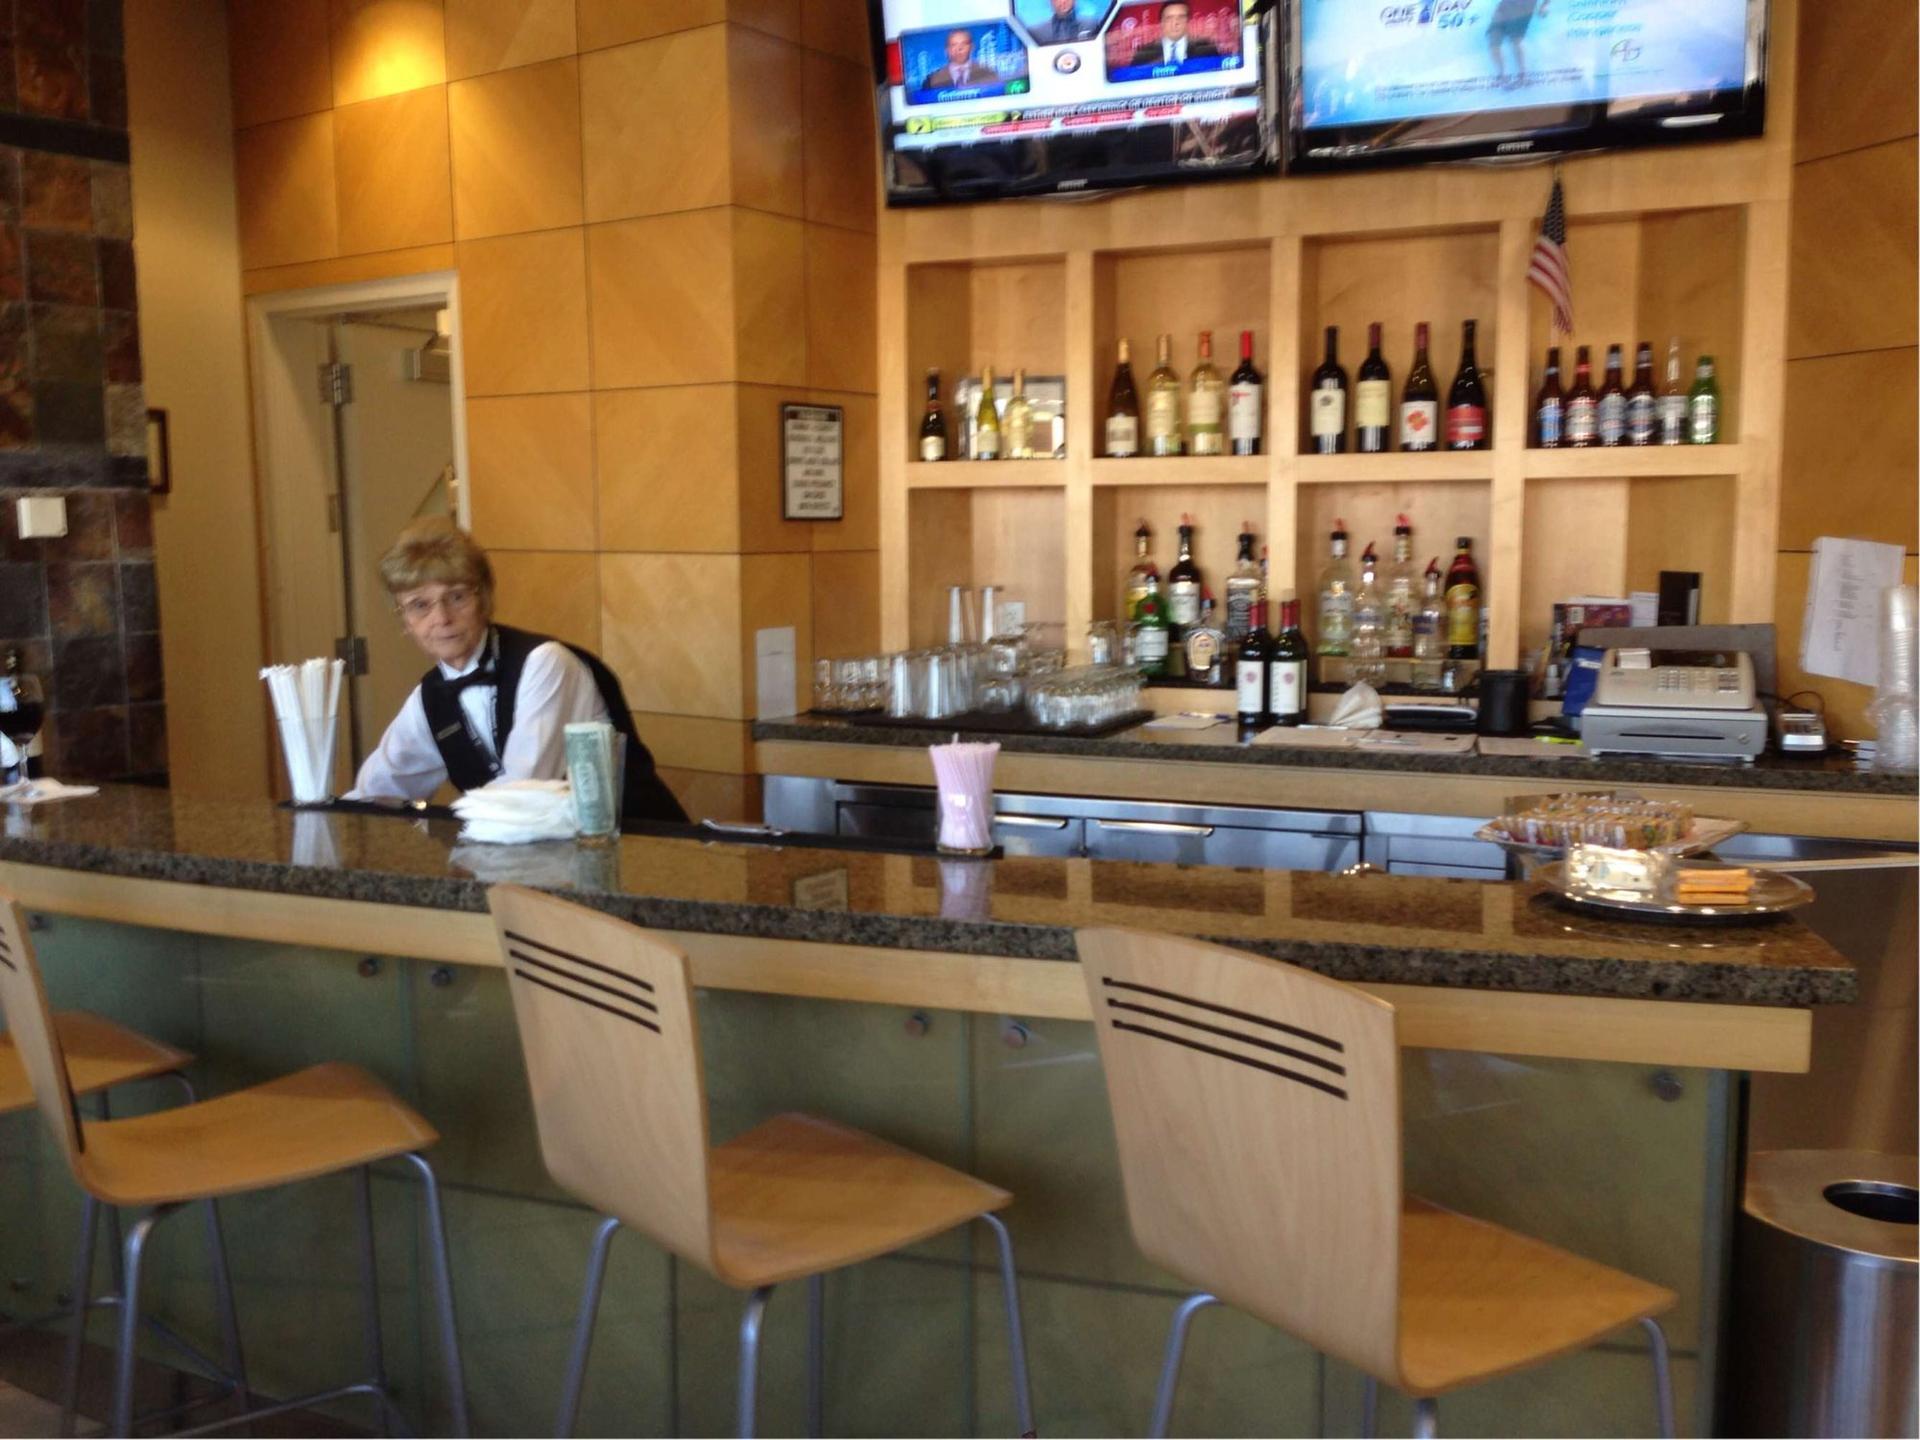 American Airlines Admirals Club (Gates A19-A21) image 1 of 16